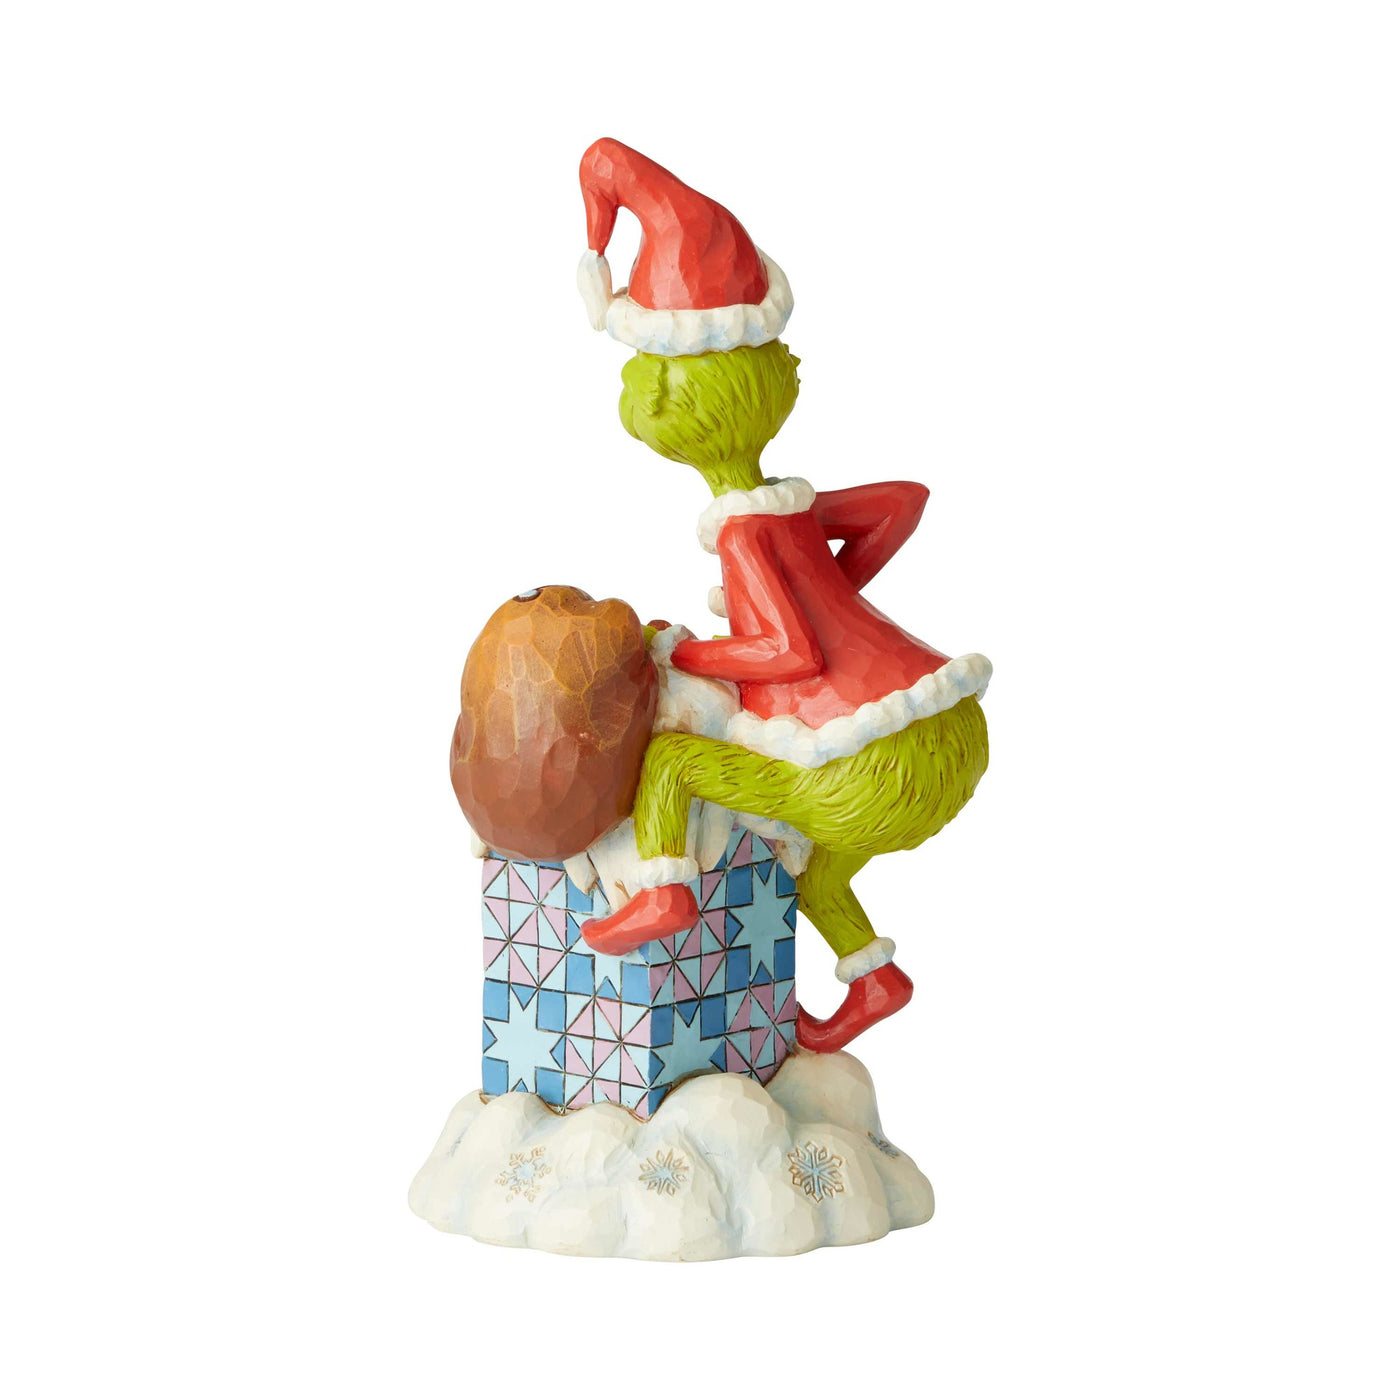 Jim Shore Grinch Climbing in Chimney Figurine New with Box